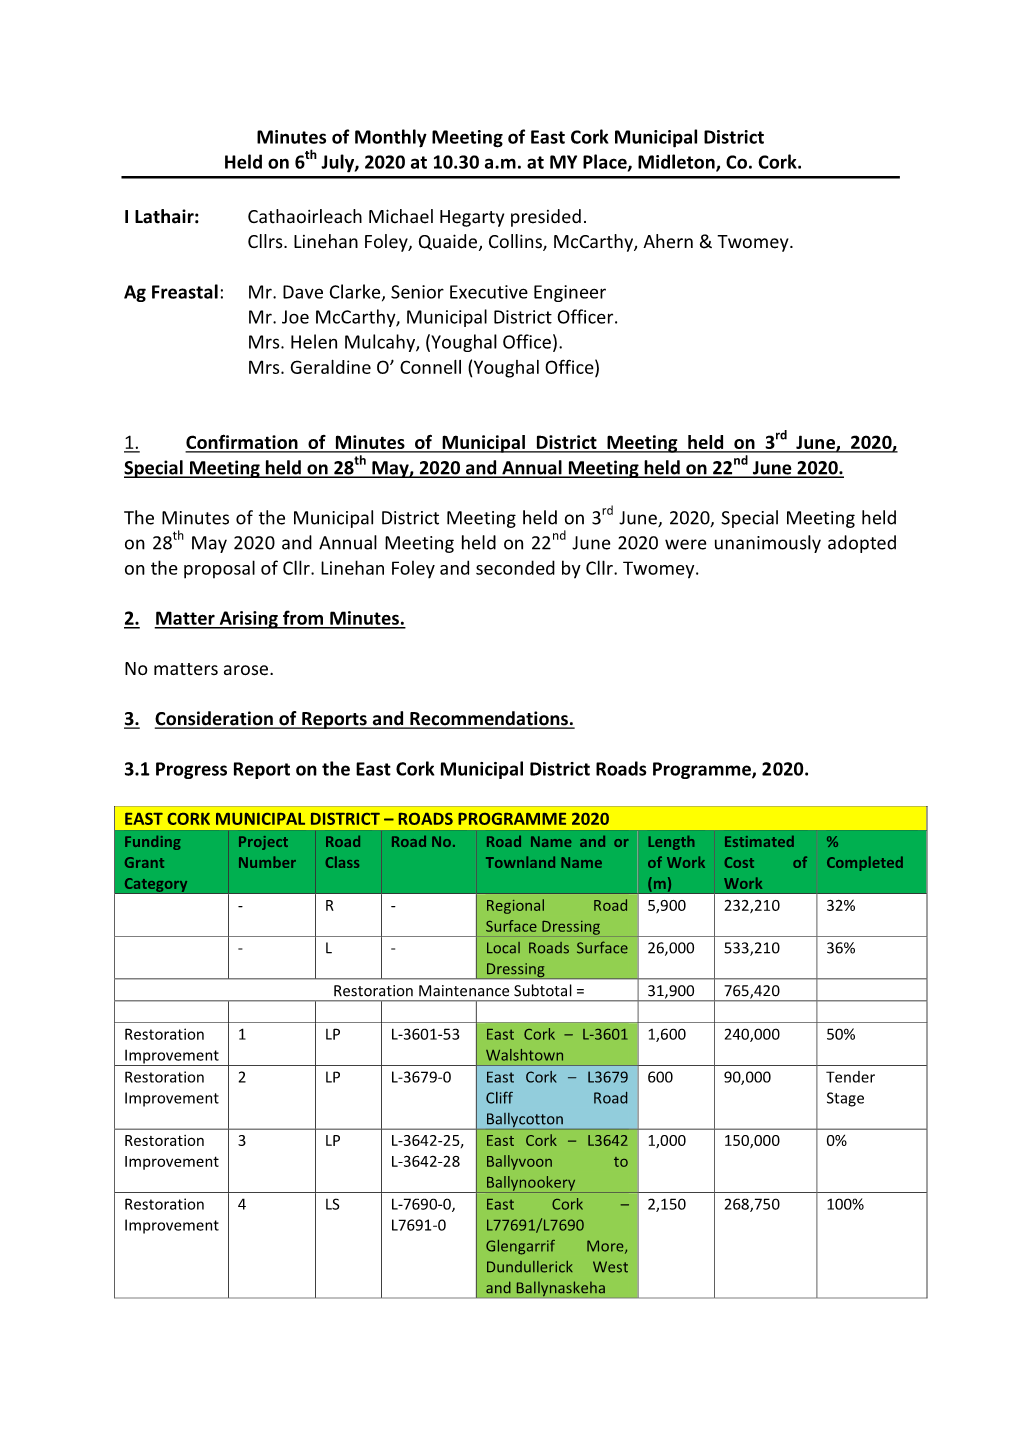 Minutes of Monthly Meeting of East Cork Municipal District Held on 6Th July, 2020 at 10.30 A.M